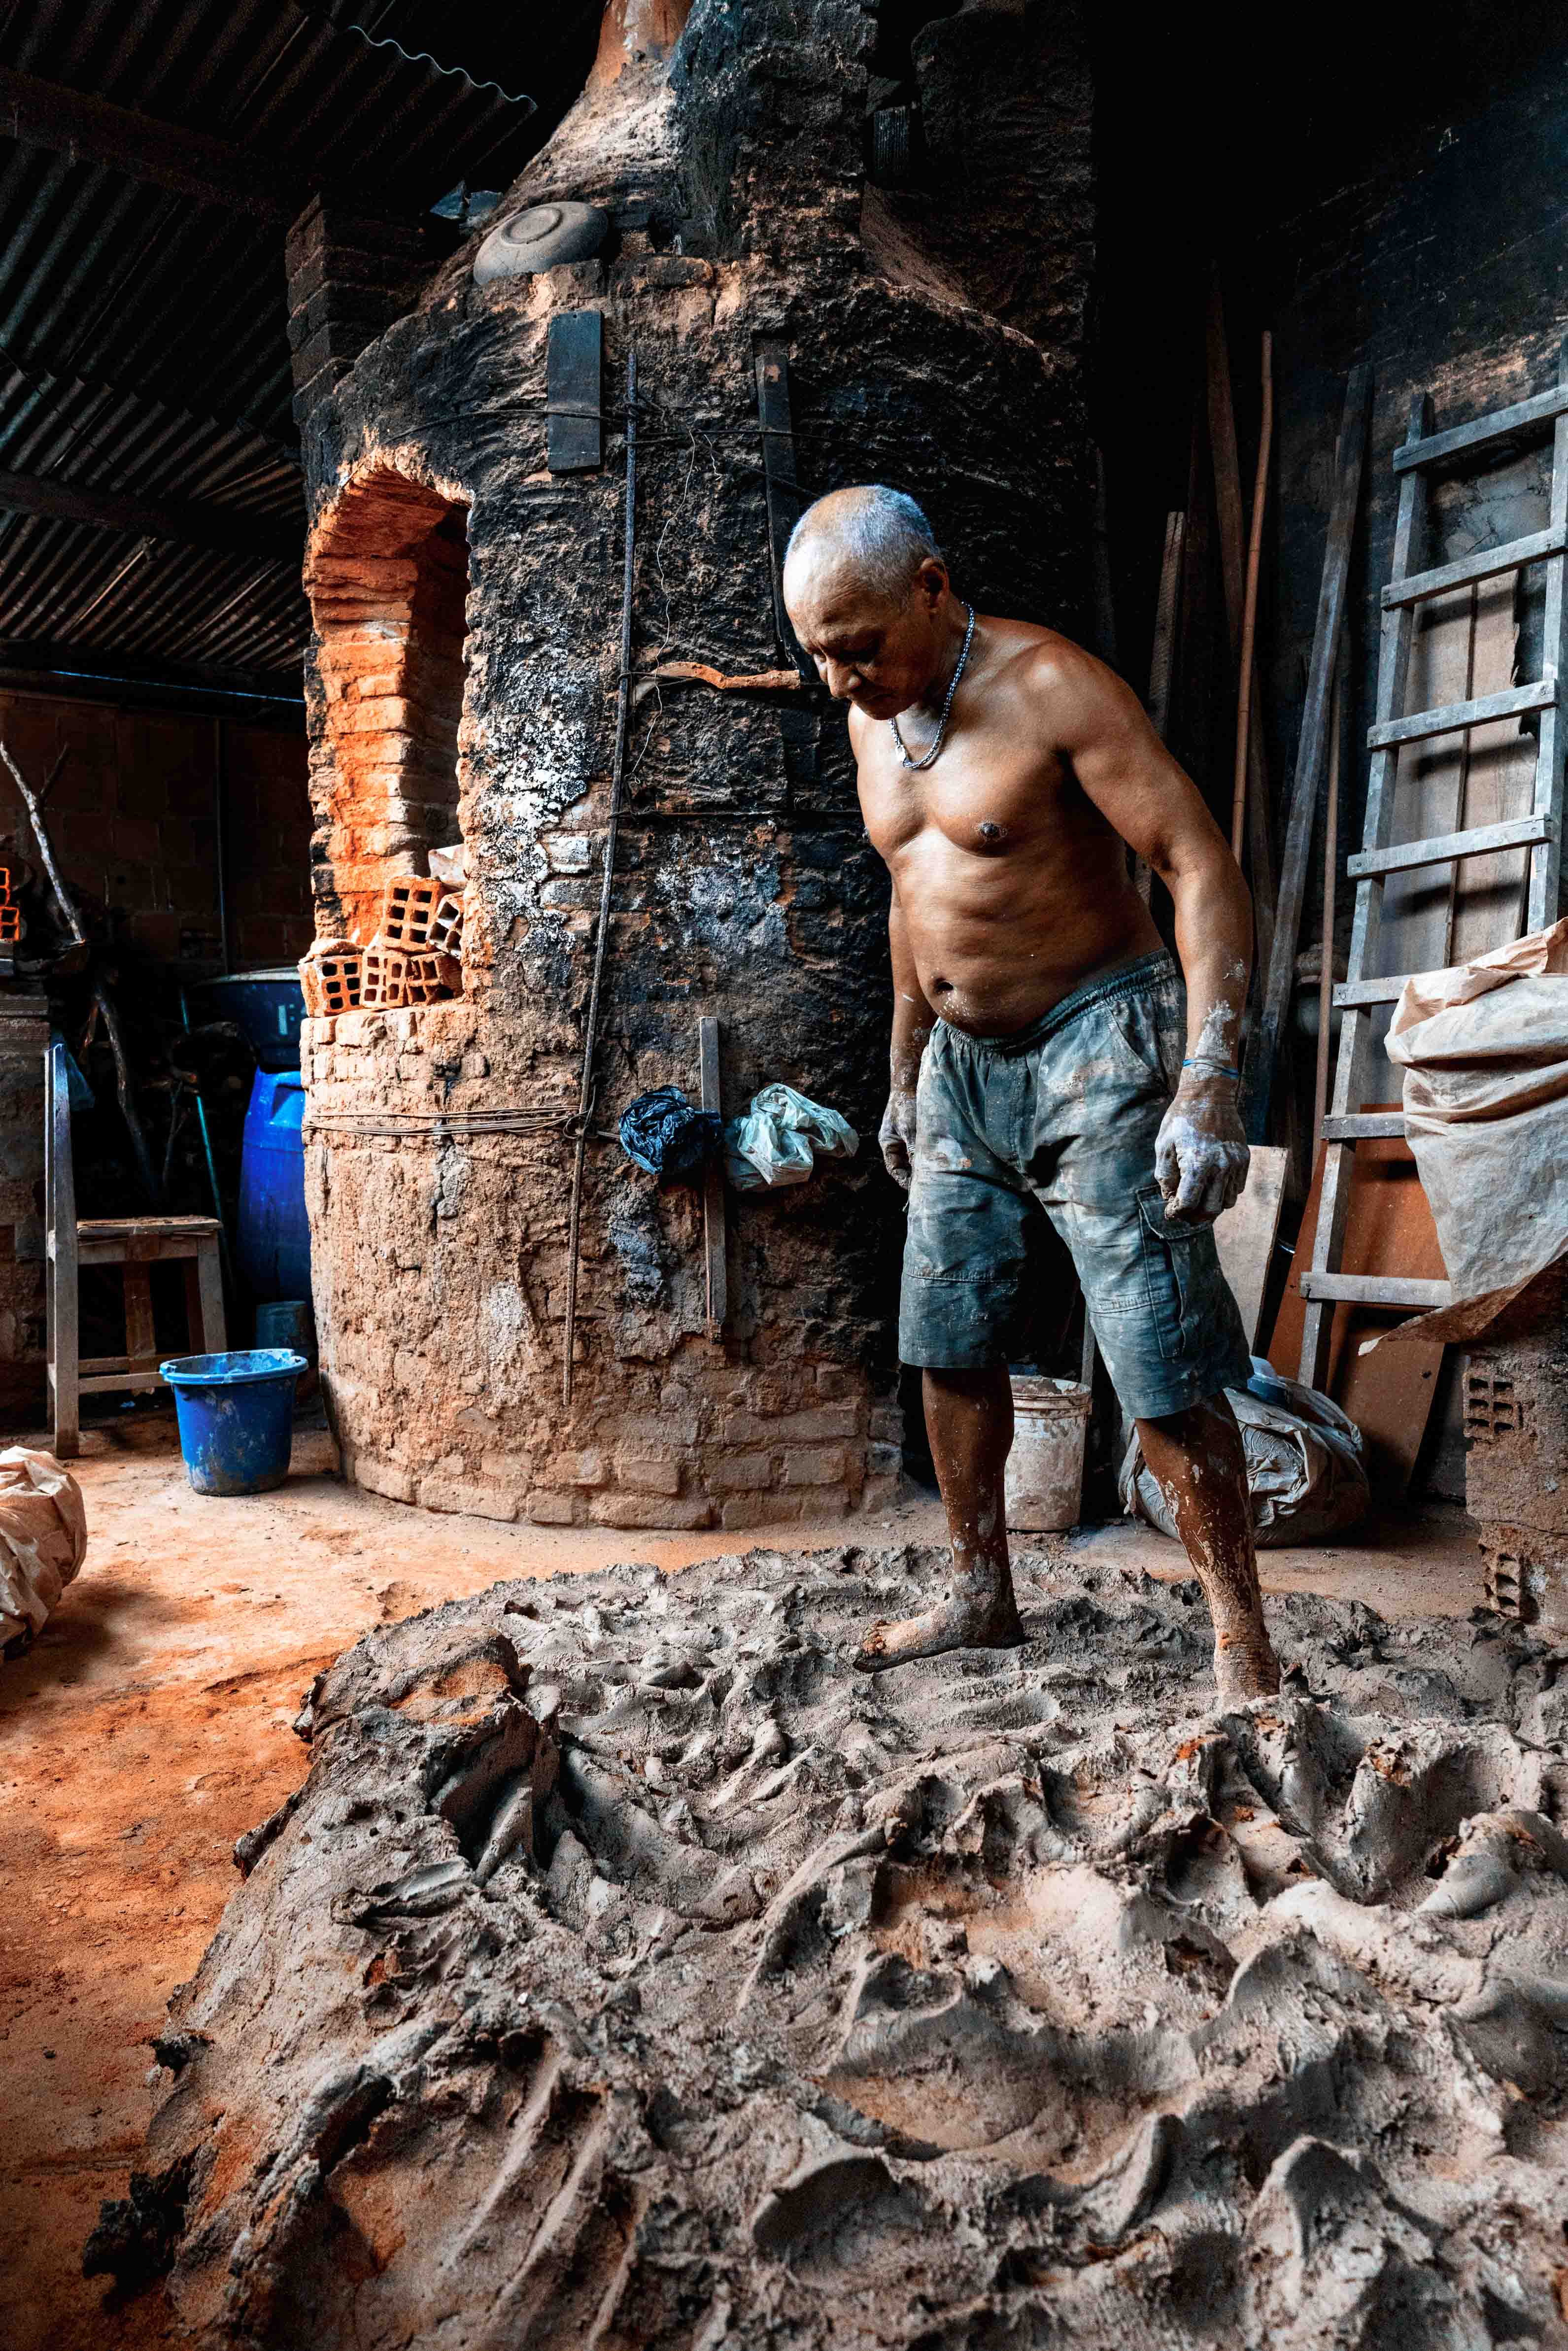 Tracunhaem is a city in northeastern Brazil, known for handicrafts with clay. For generations, potters have been working in their workshops, making their lives with clay. This is a view of one of these shops. (In this image: Sr. Rosimario treads the clay to remove impurities and prepares it to mold)